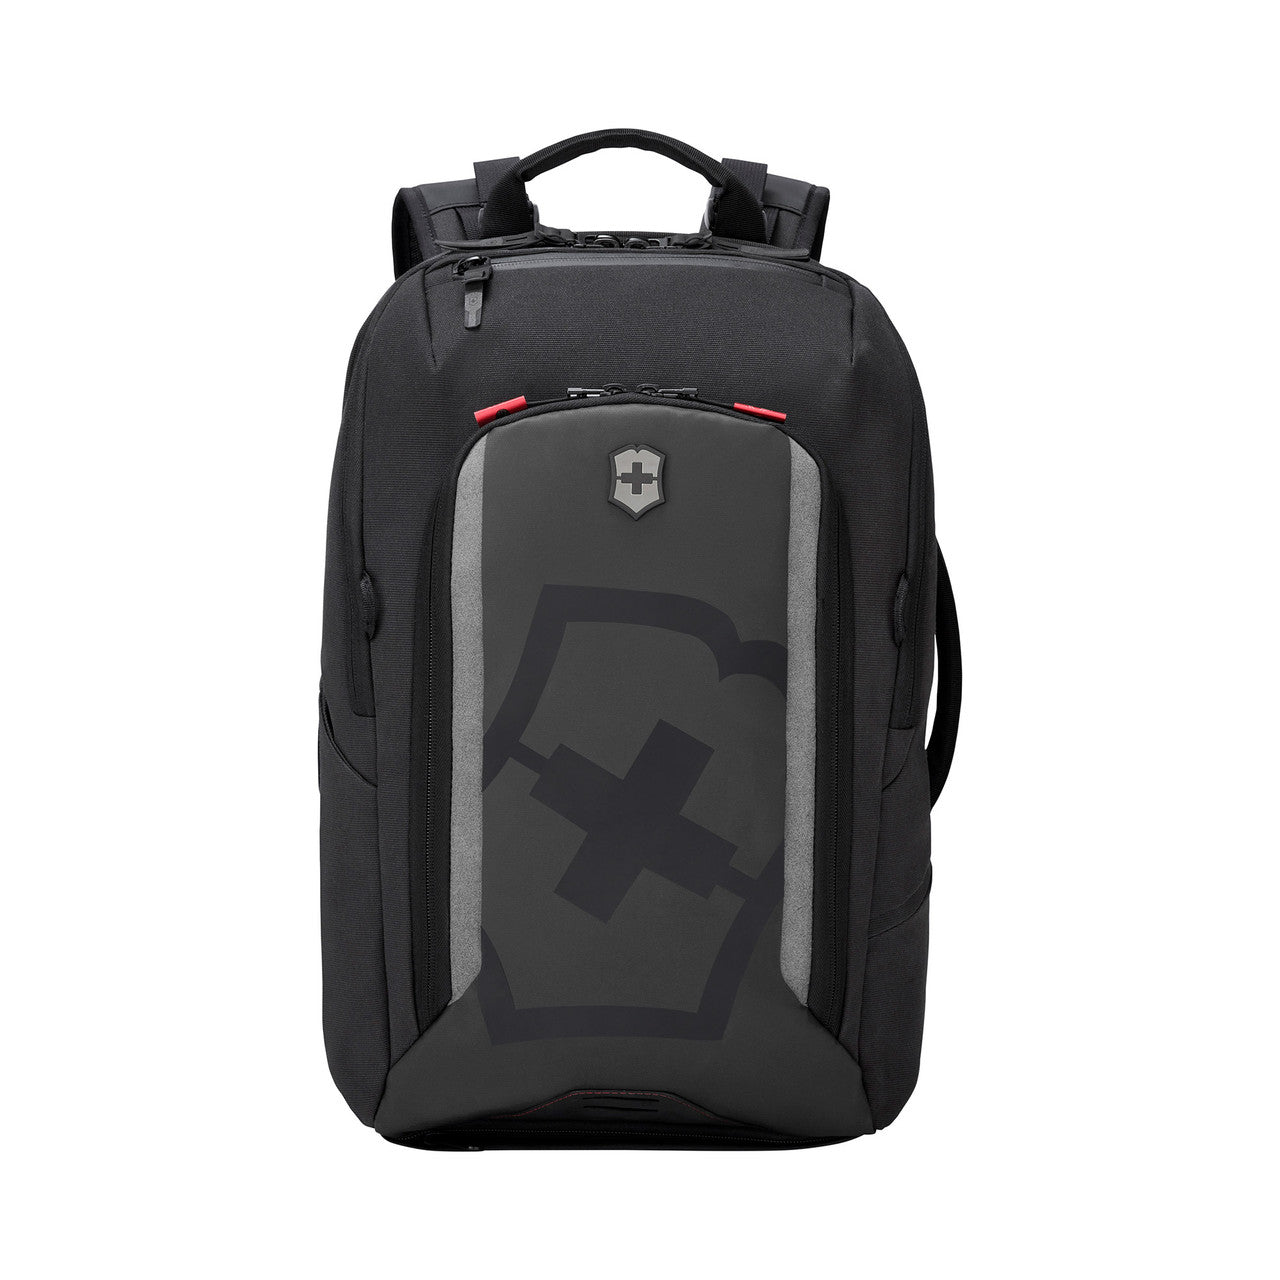 VICTORINOX TOURING 2 COMMUTER BACKPACK BLACK